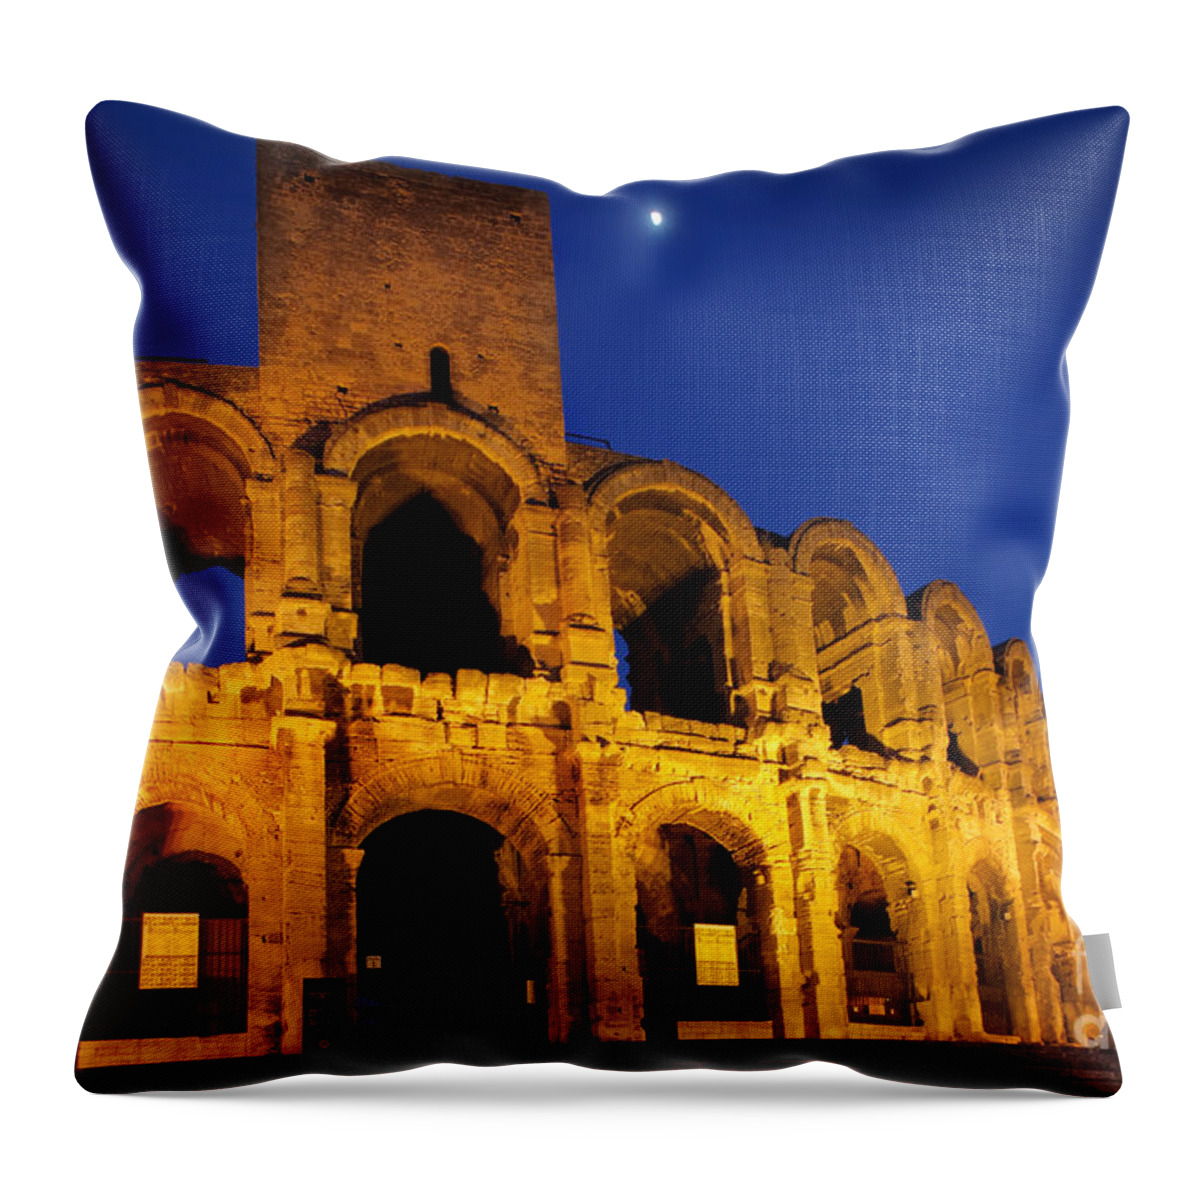 Arles Throw Pillow featuring the photograph Arles Roman Arena by Inge Johnsson